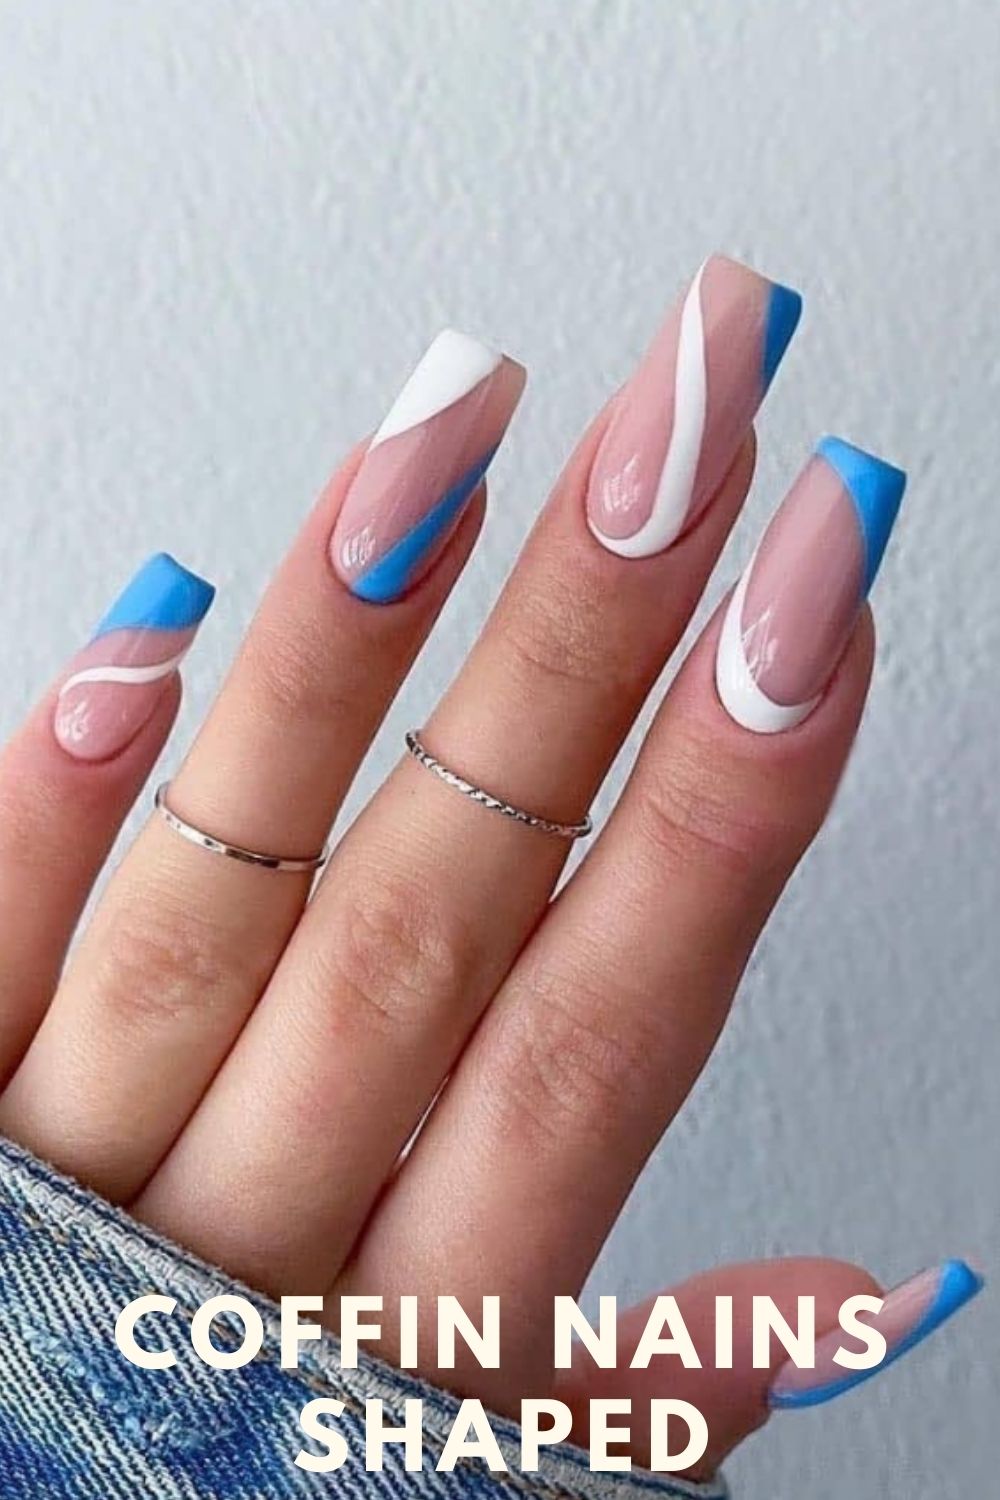 Light blue and white coffin nails